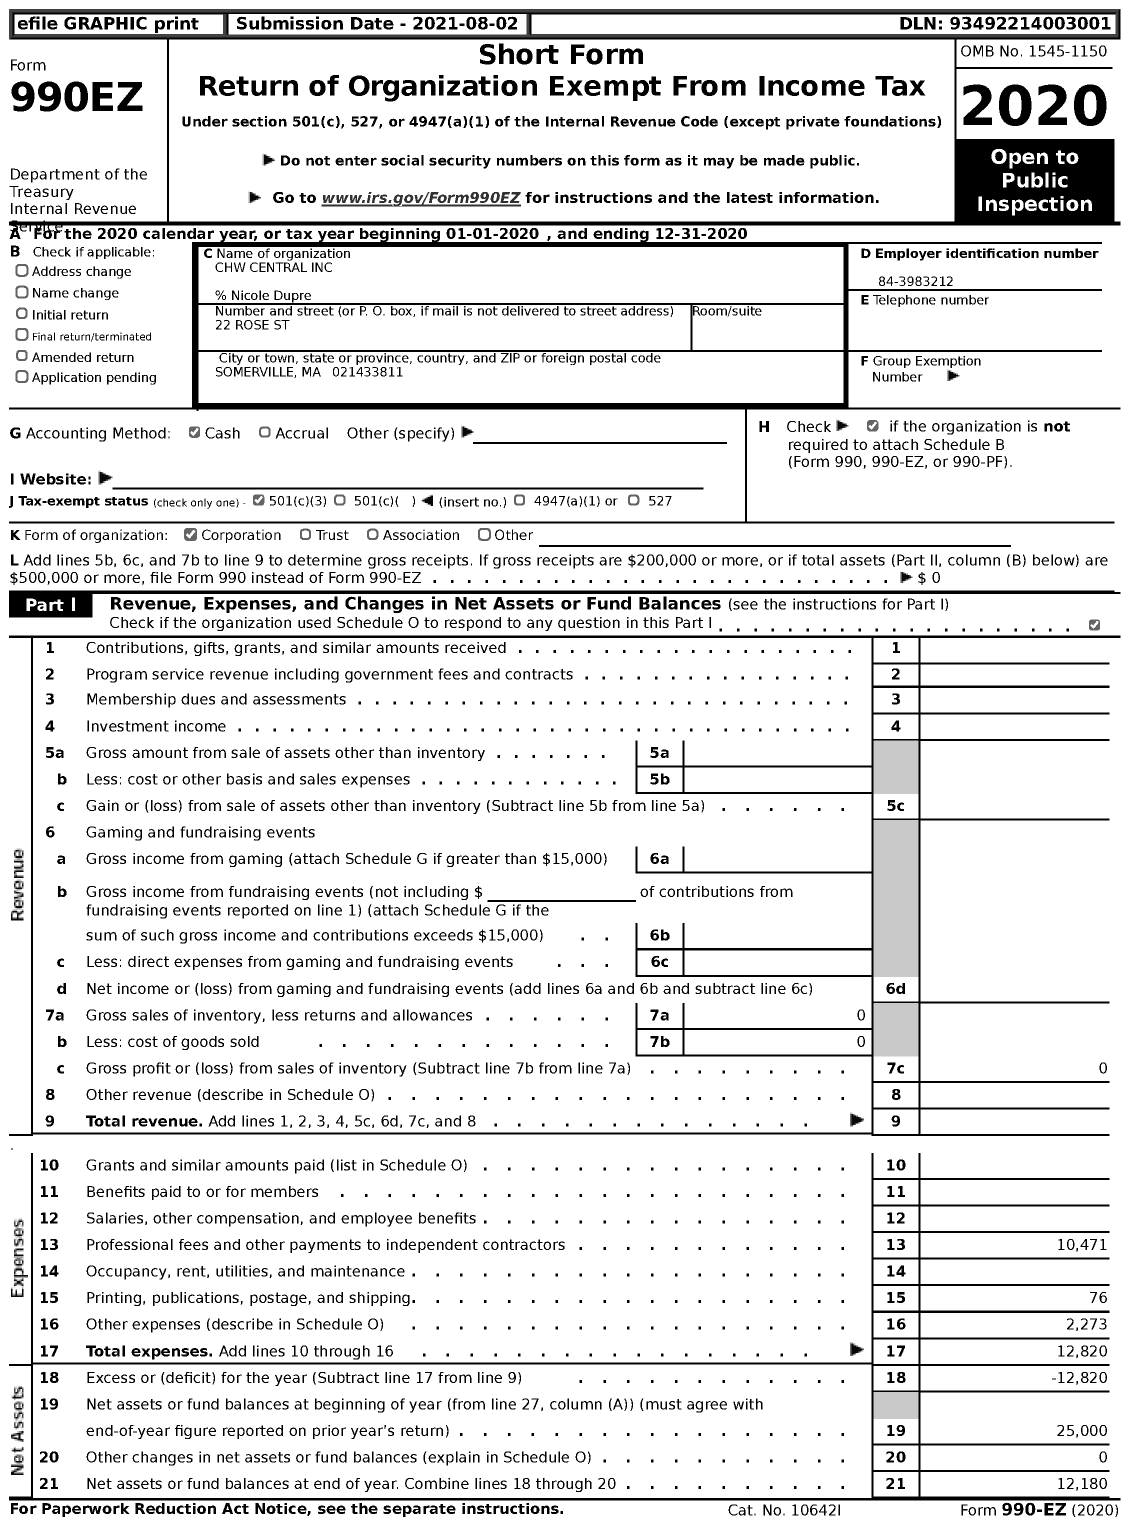 Image of first page of 2020 Form 990EZ for CHW Central